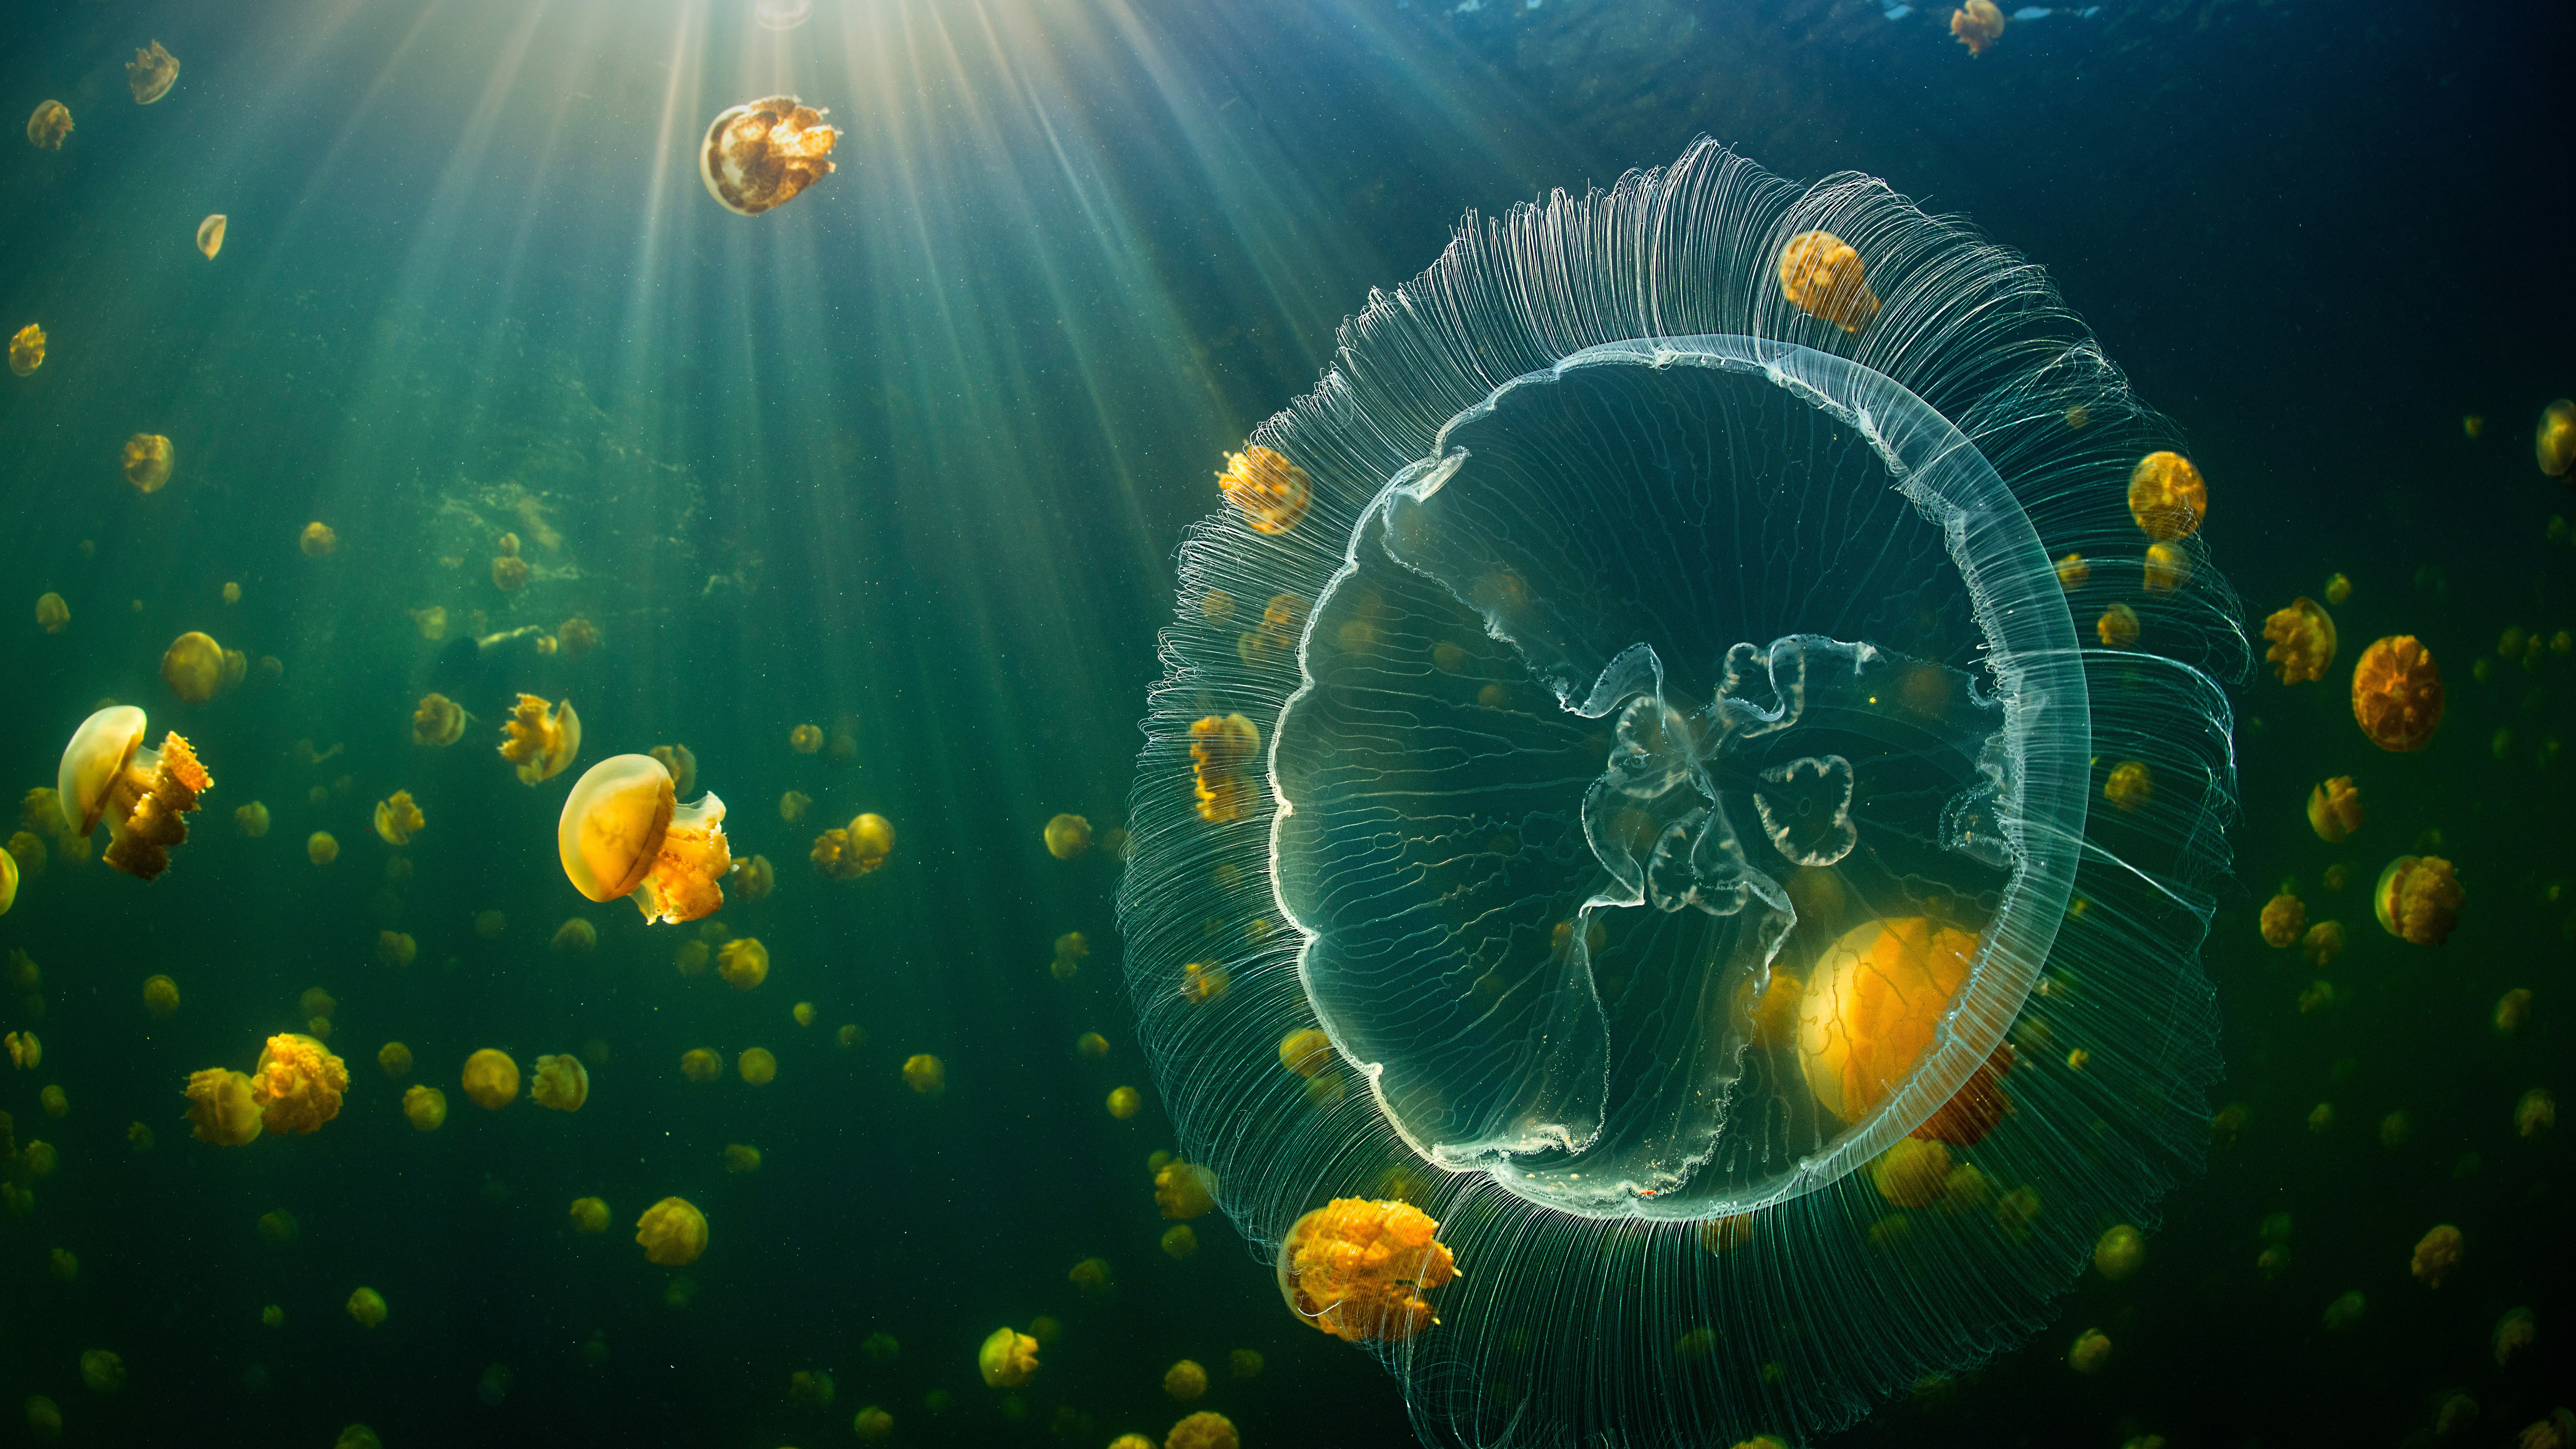 Moon jelly and an aggregation of stingless golden jellyfish - Raja Ampat, Indonesia by Alex Mustard